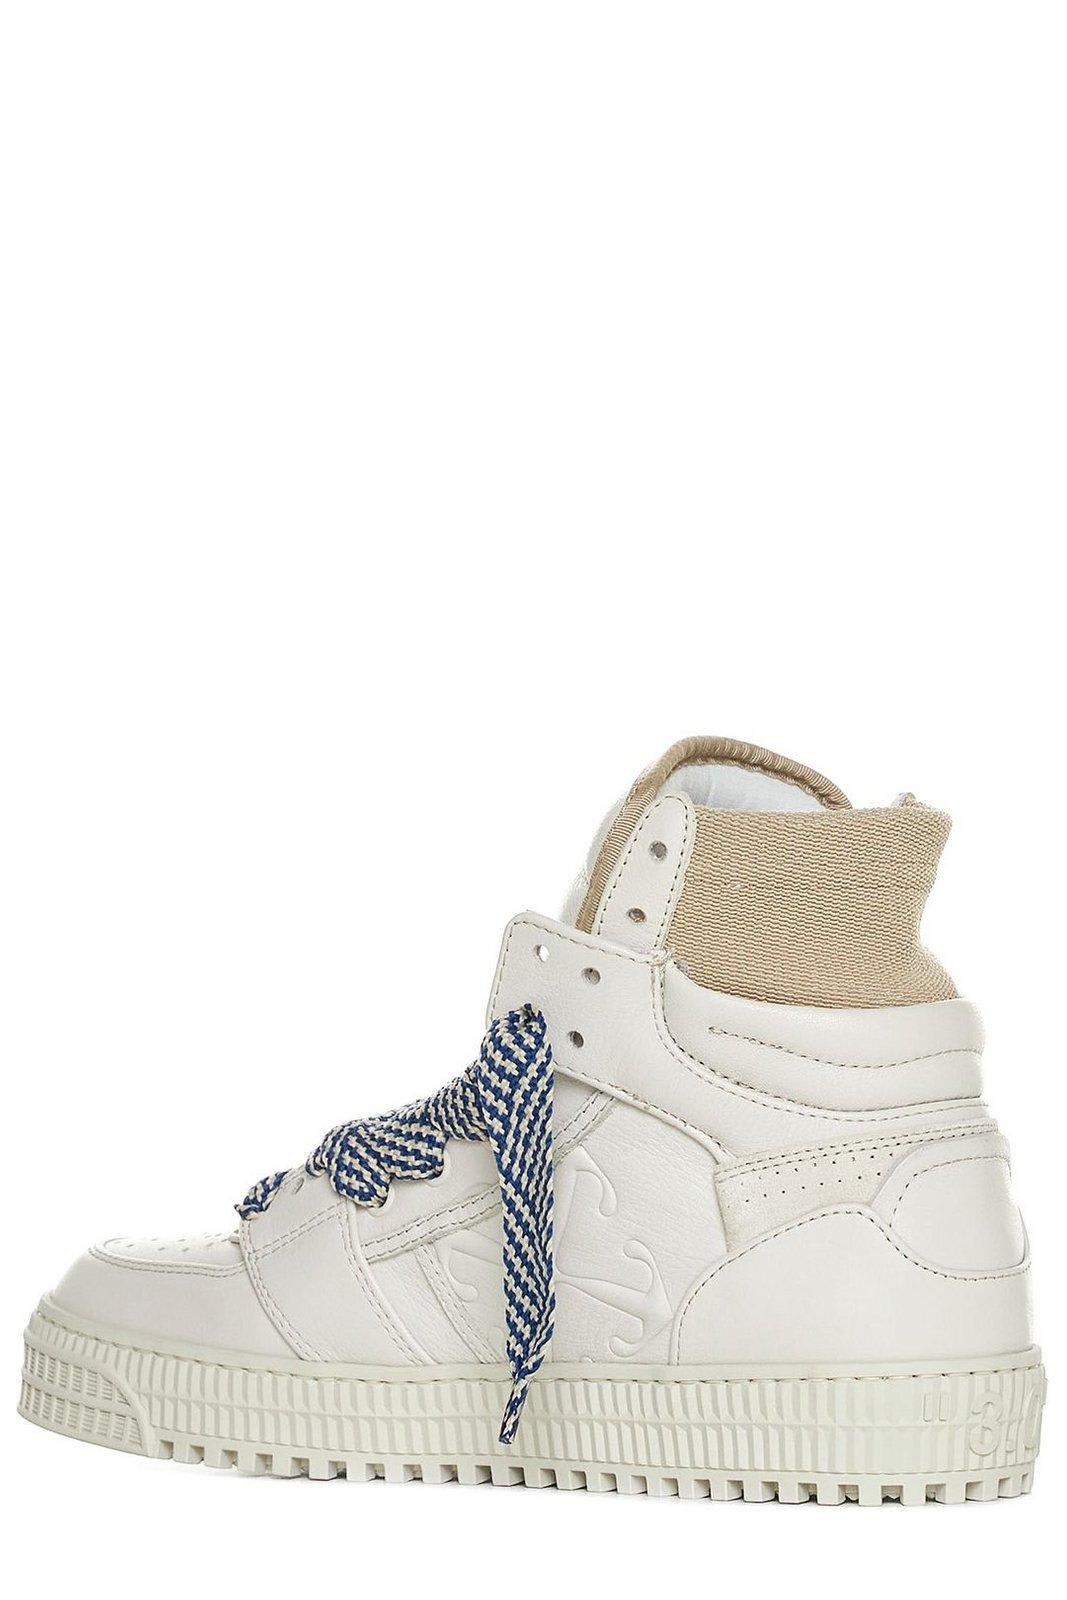 Shop Off-white 3.0 Off-court Lace-up Sneakers In Cream/navy